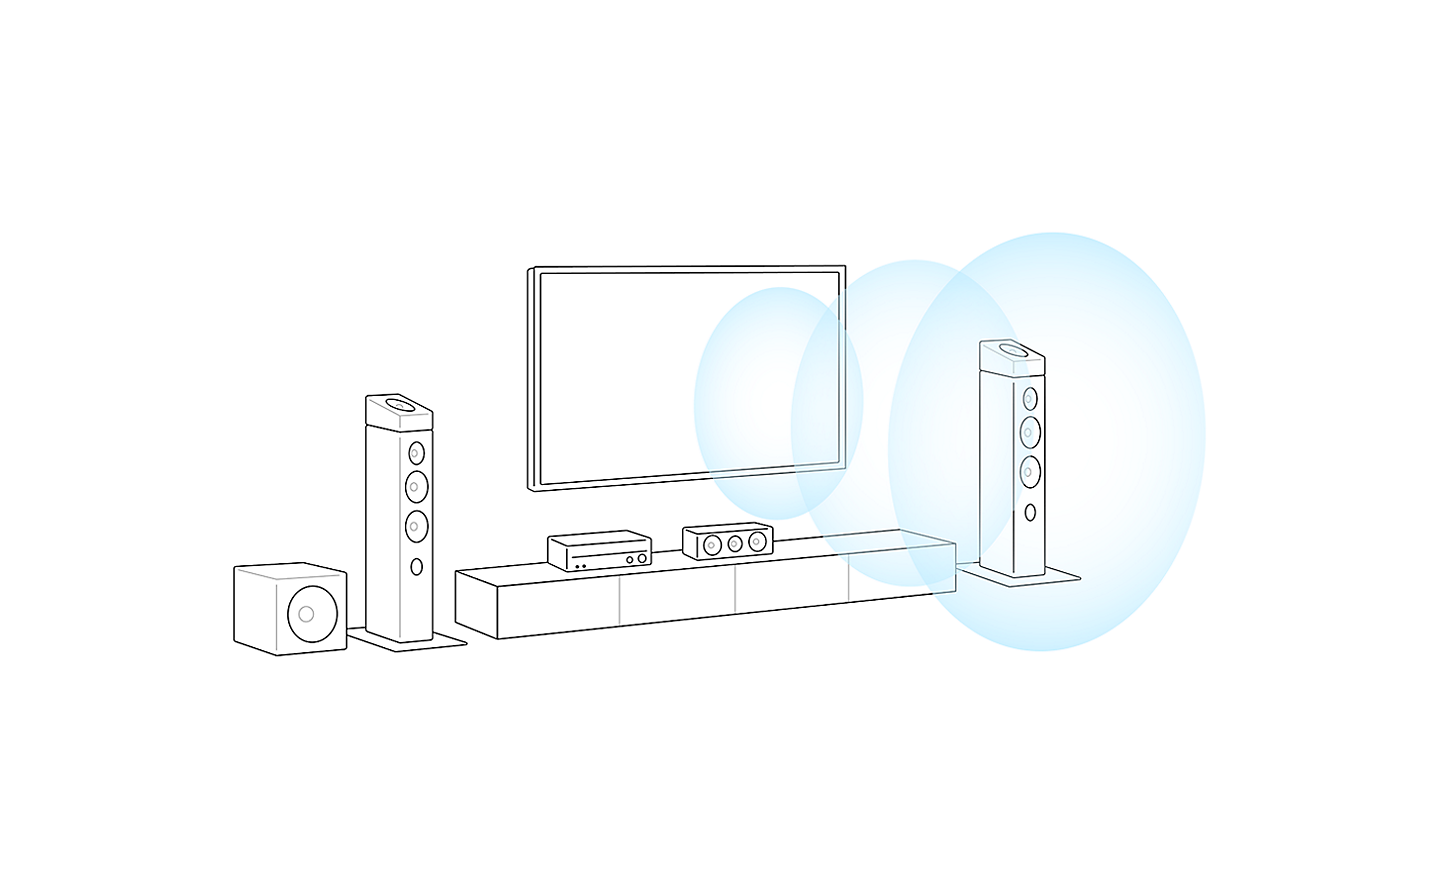 Outline only image of a TV setup. 3 blue circles are coming out of the center of the TV representing the sound direction